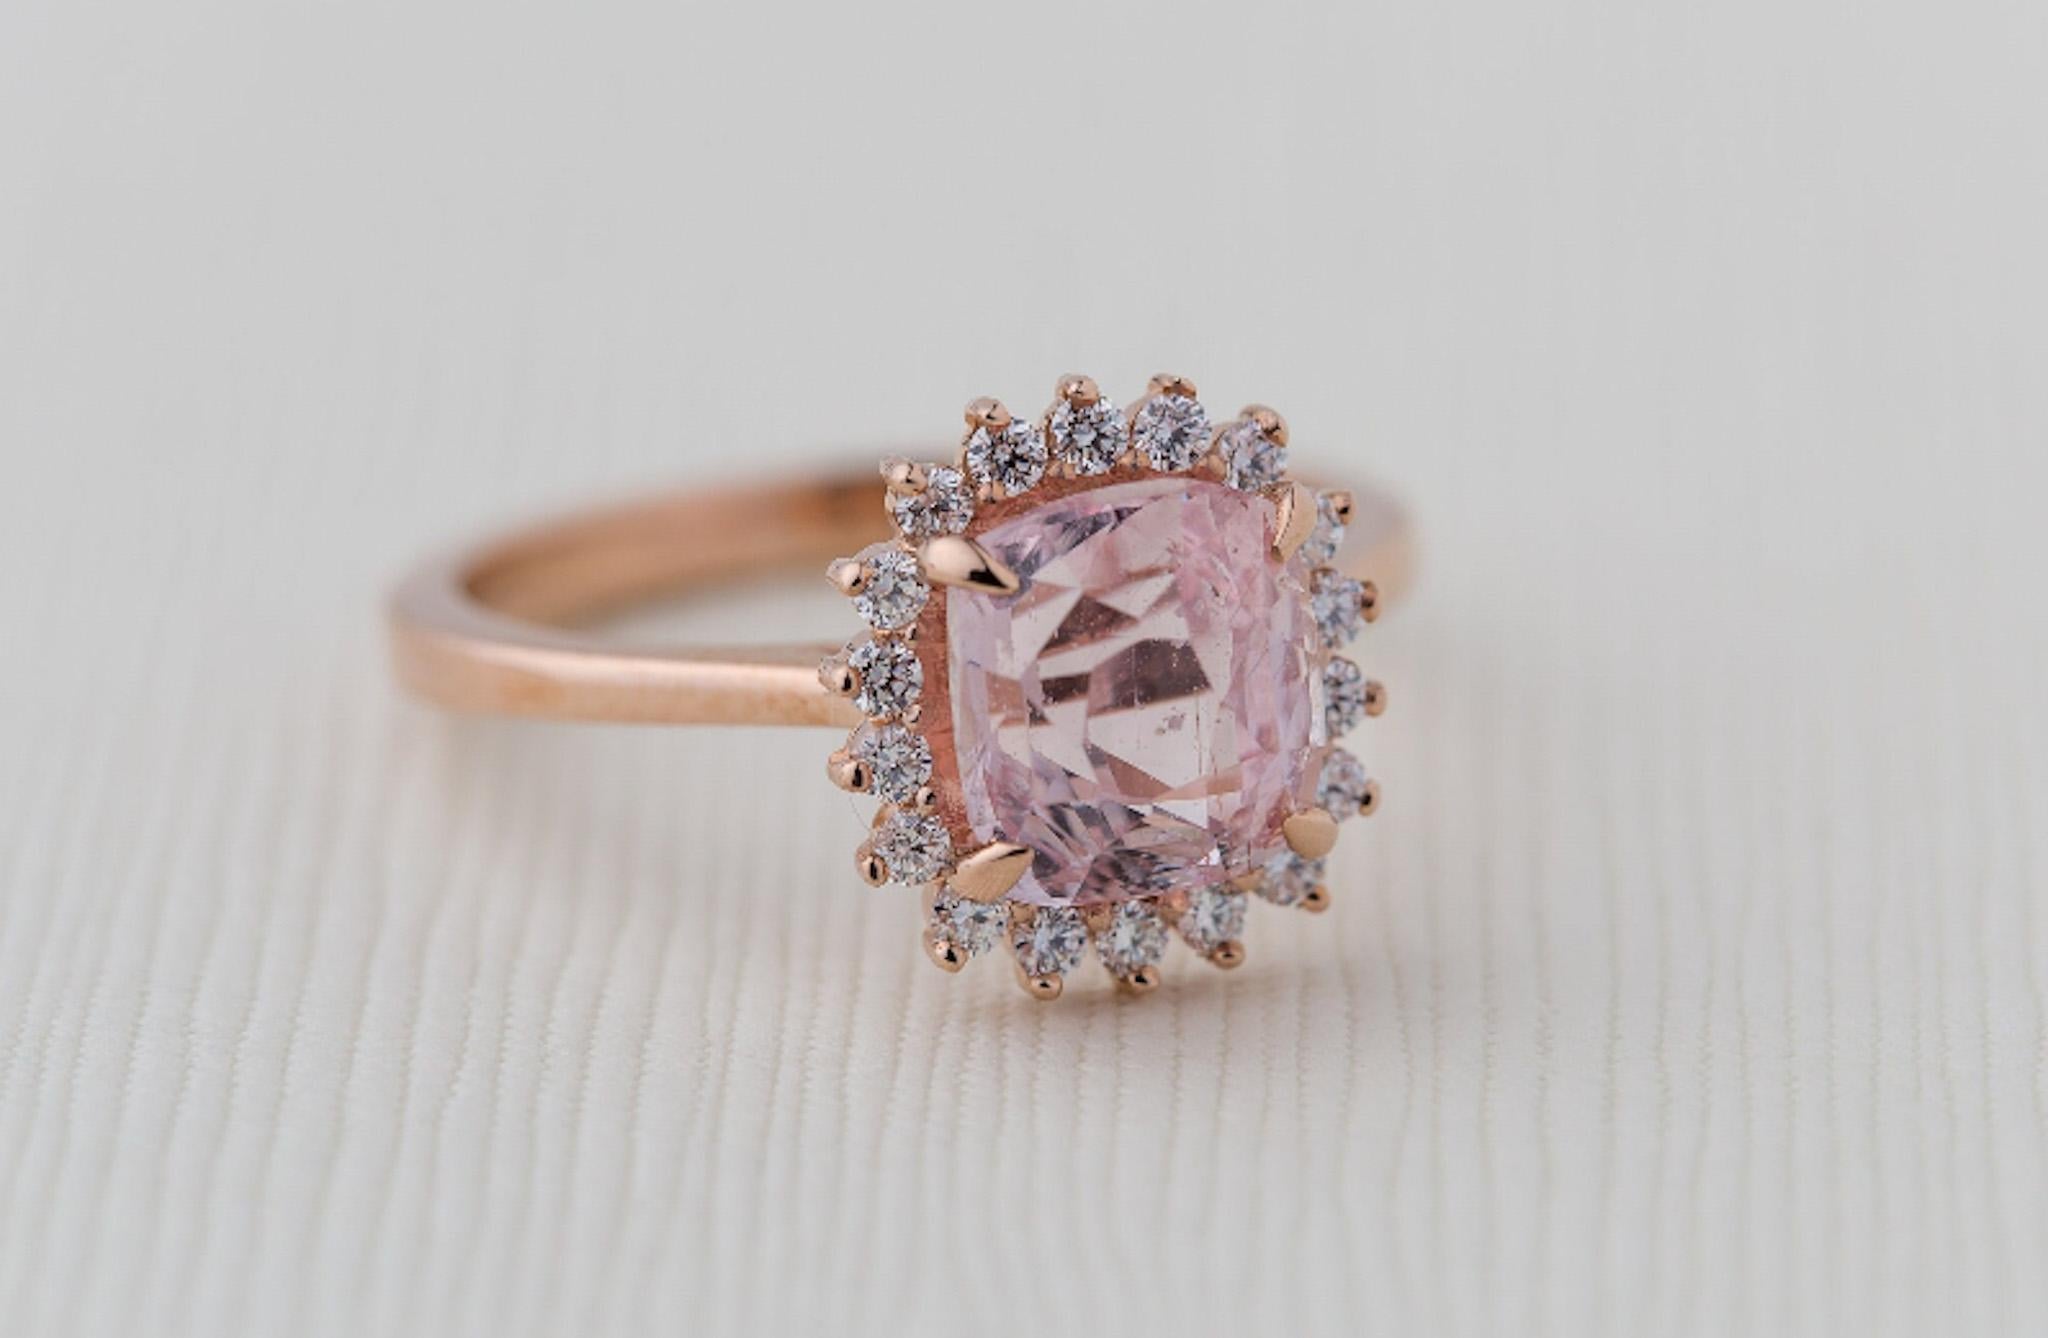 For Sale:  GIA Certified 2.46 Carat Cushion Pink Sapphire Diamond Halo Engagement Ring. 5